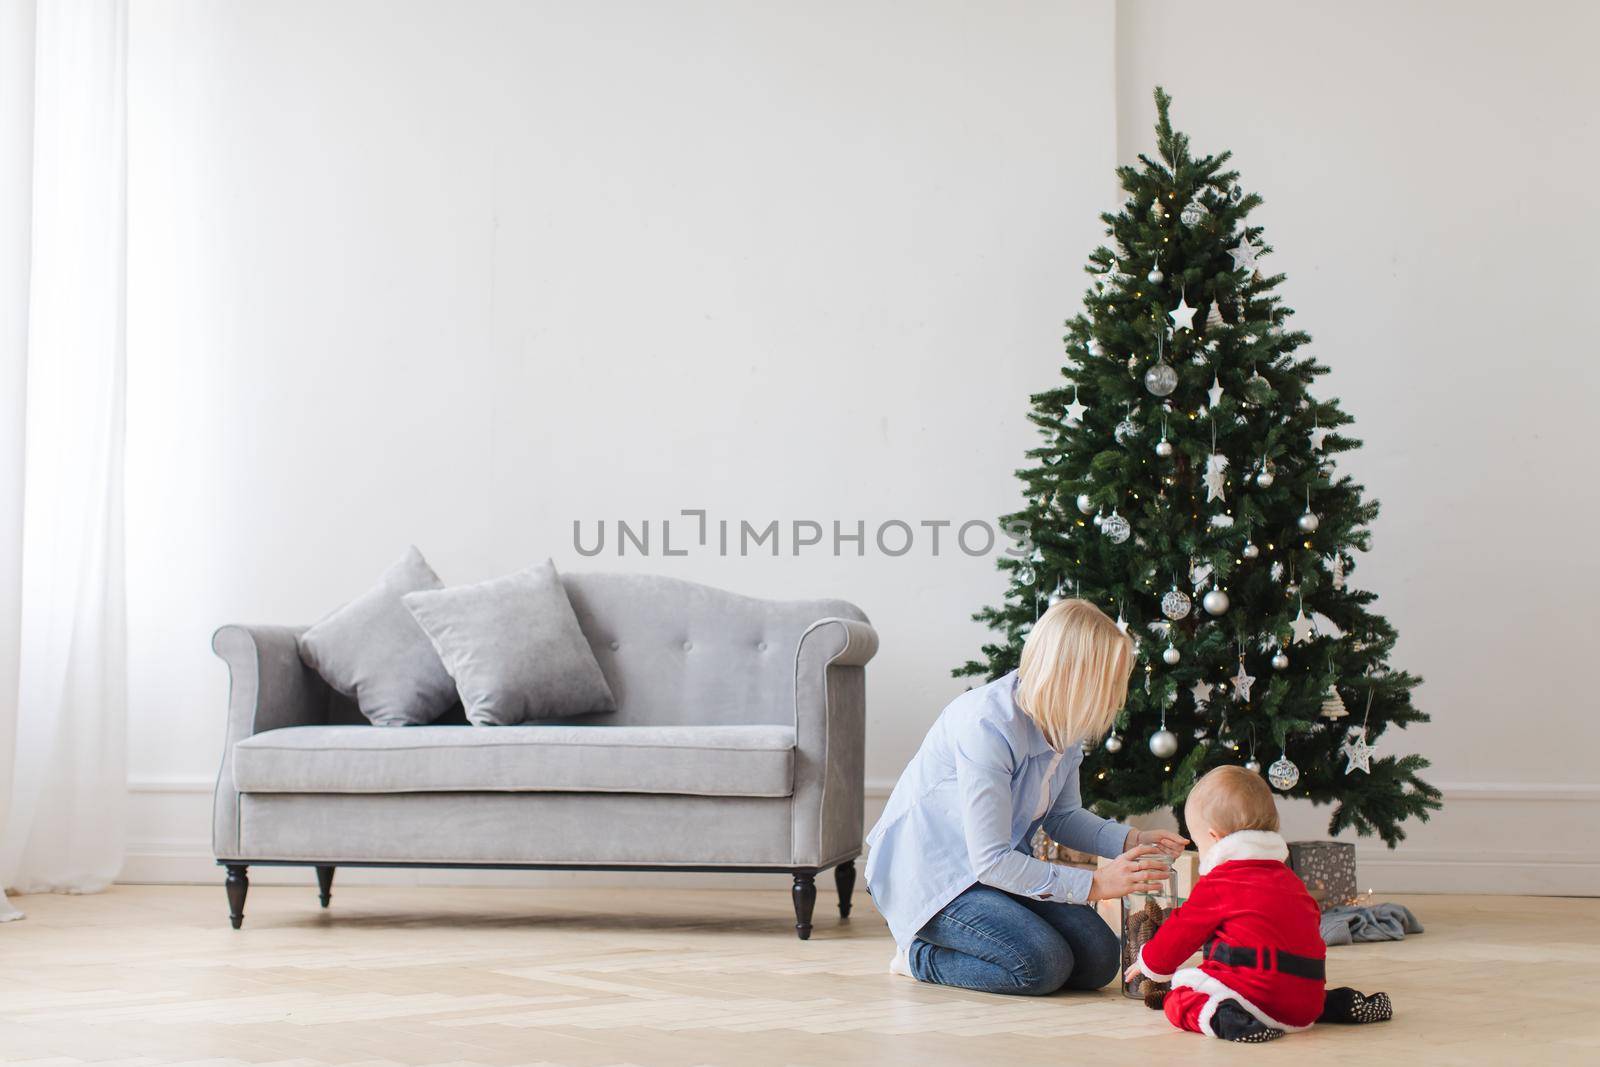 Woman with adorable child in Santa costume sitting near Christmas tree and exploring presents.